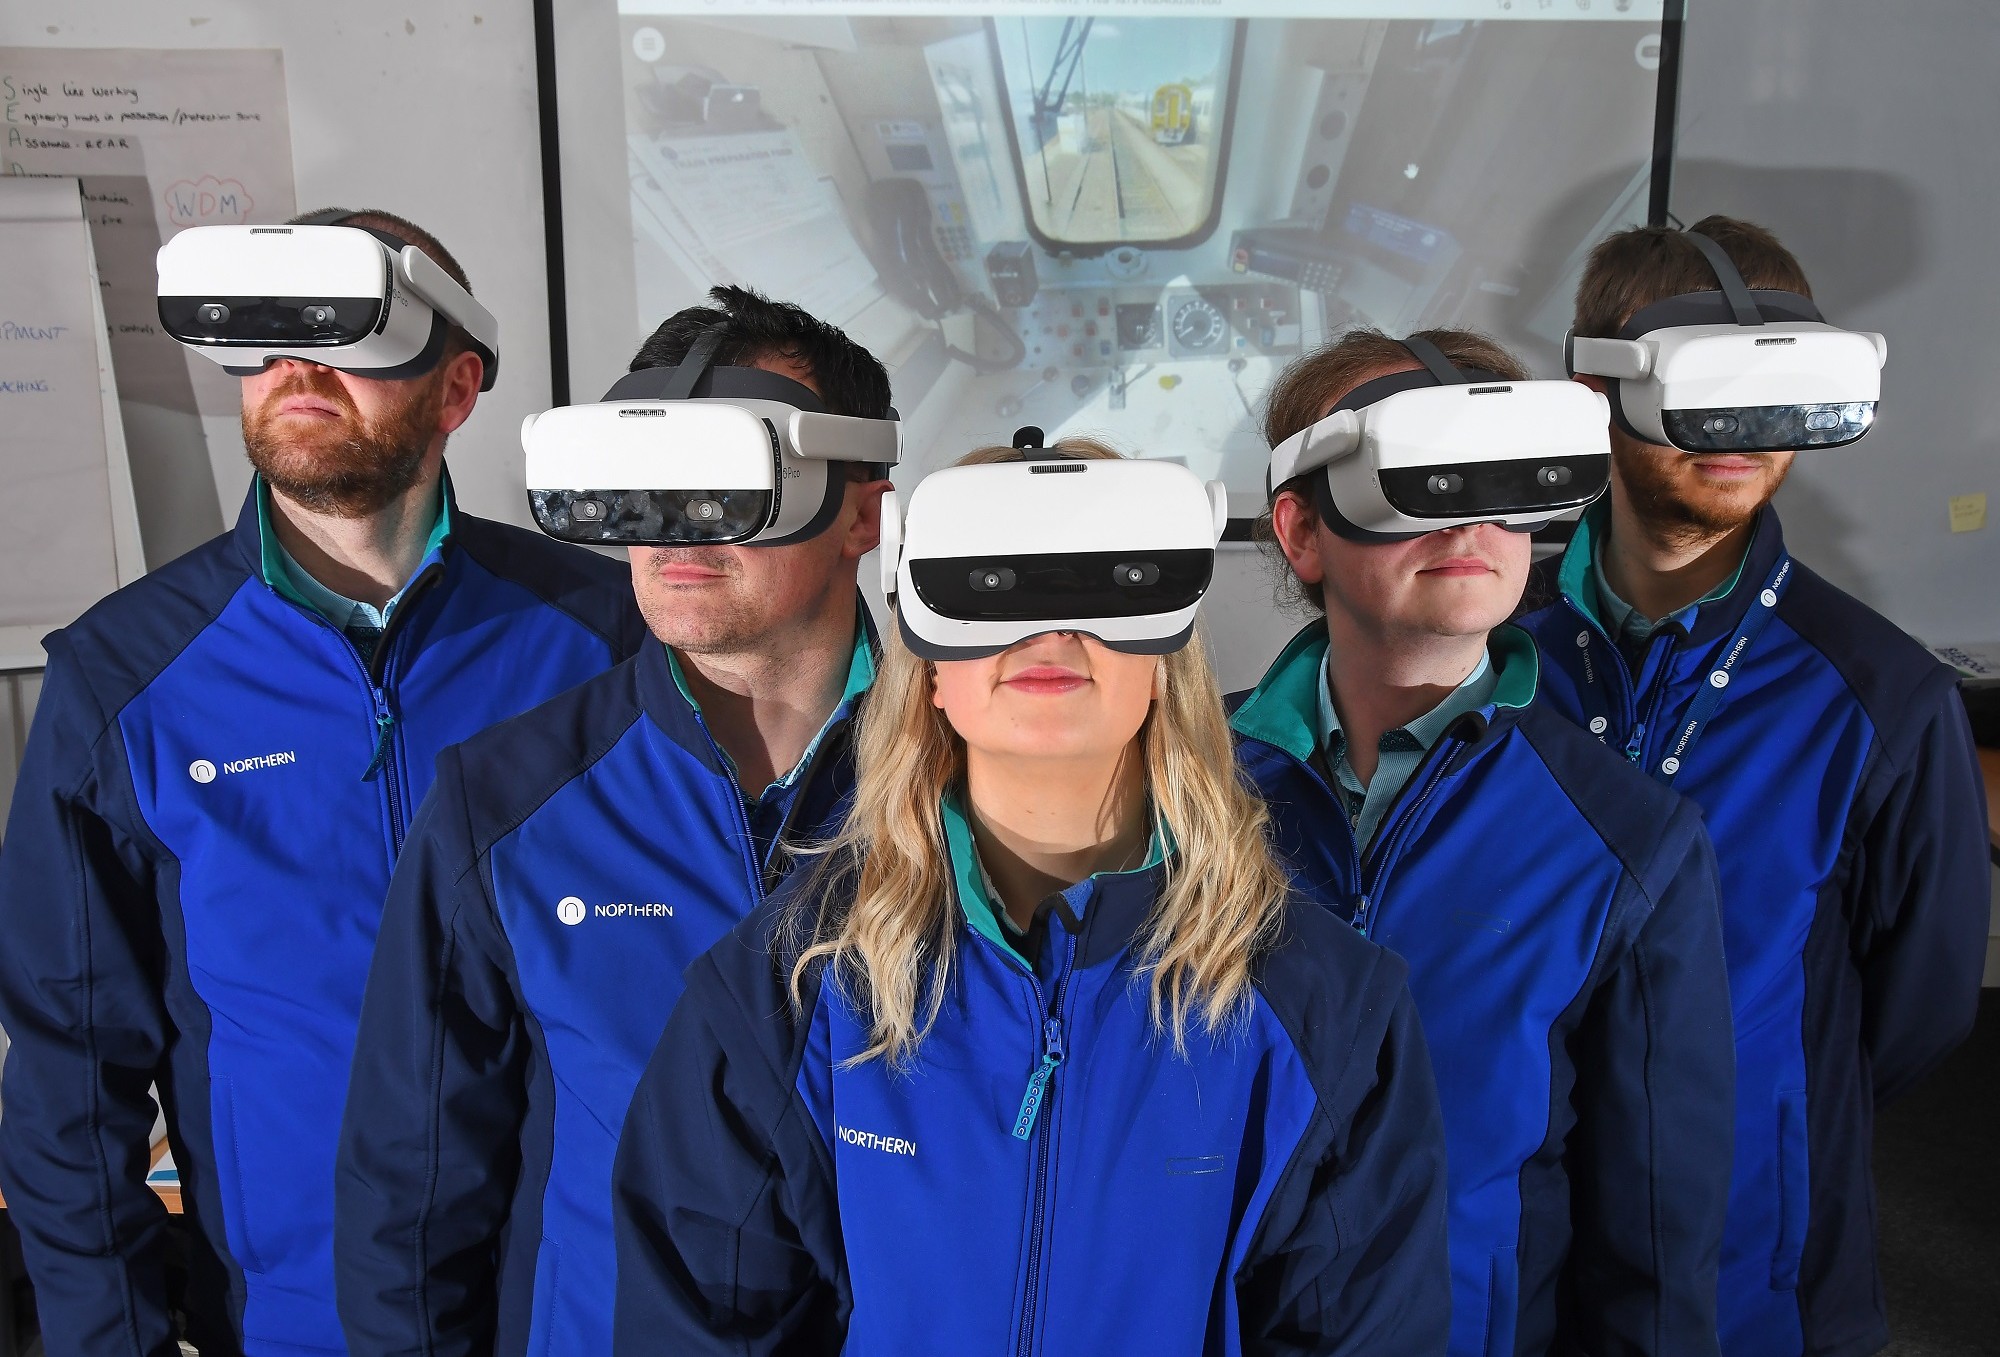 image-shows-apprentices-using-vr-technology-at-northern-training-academy